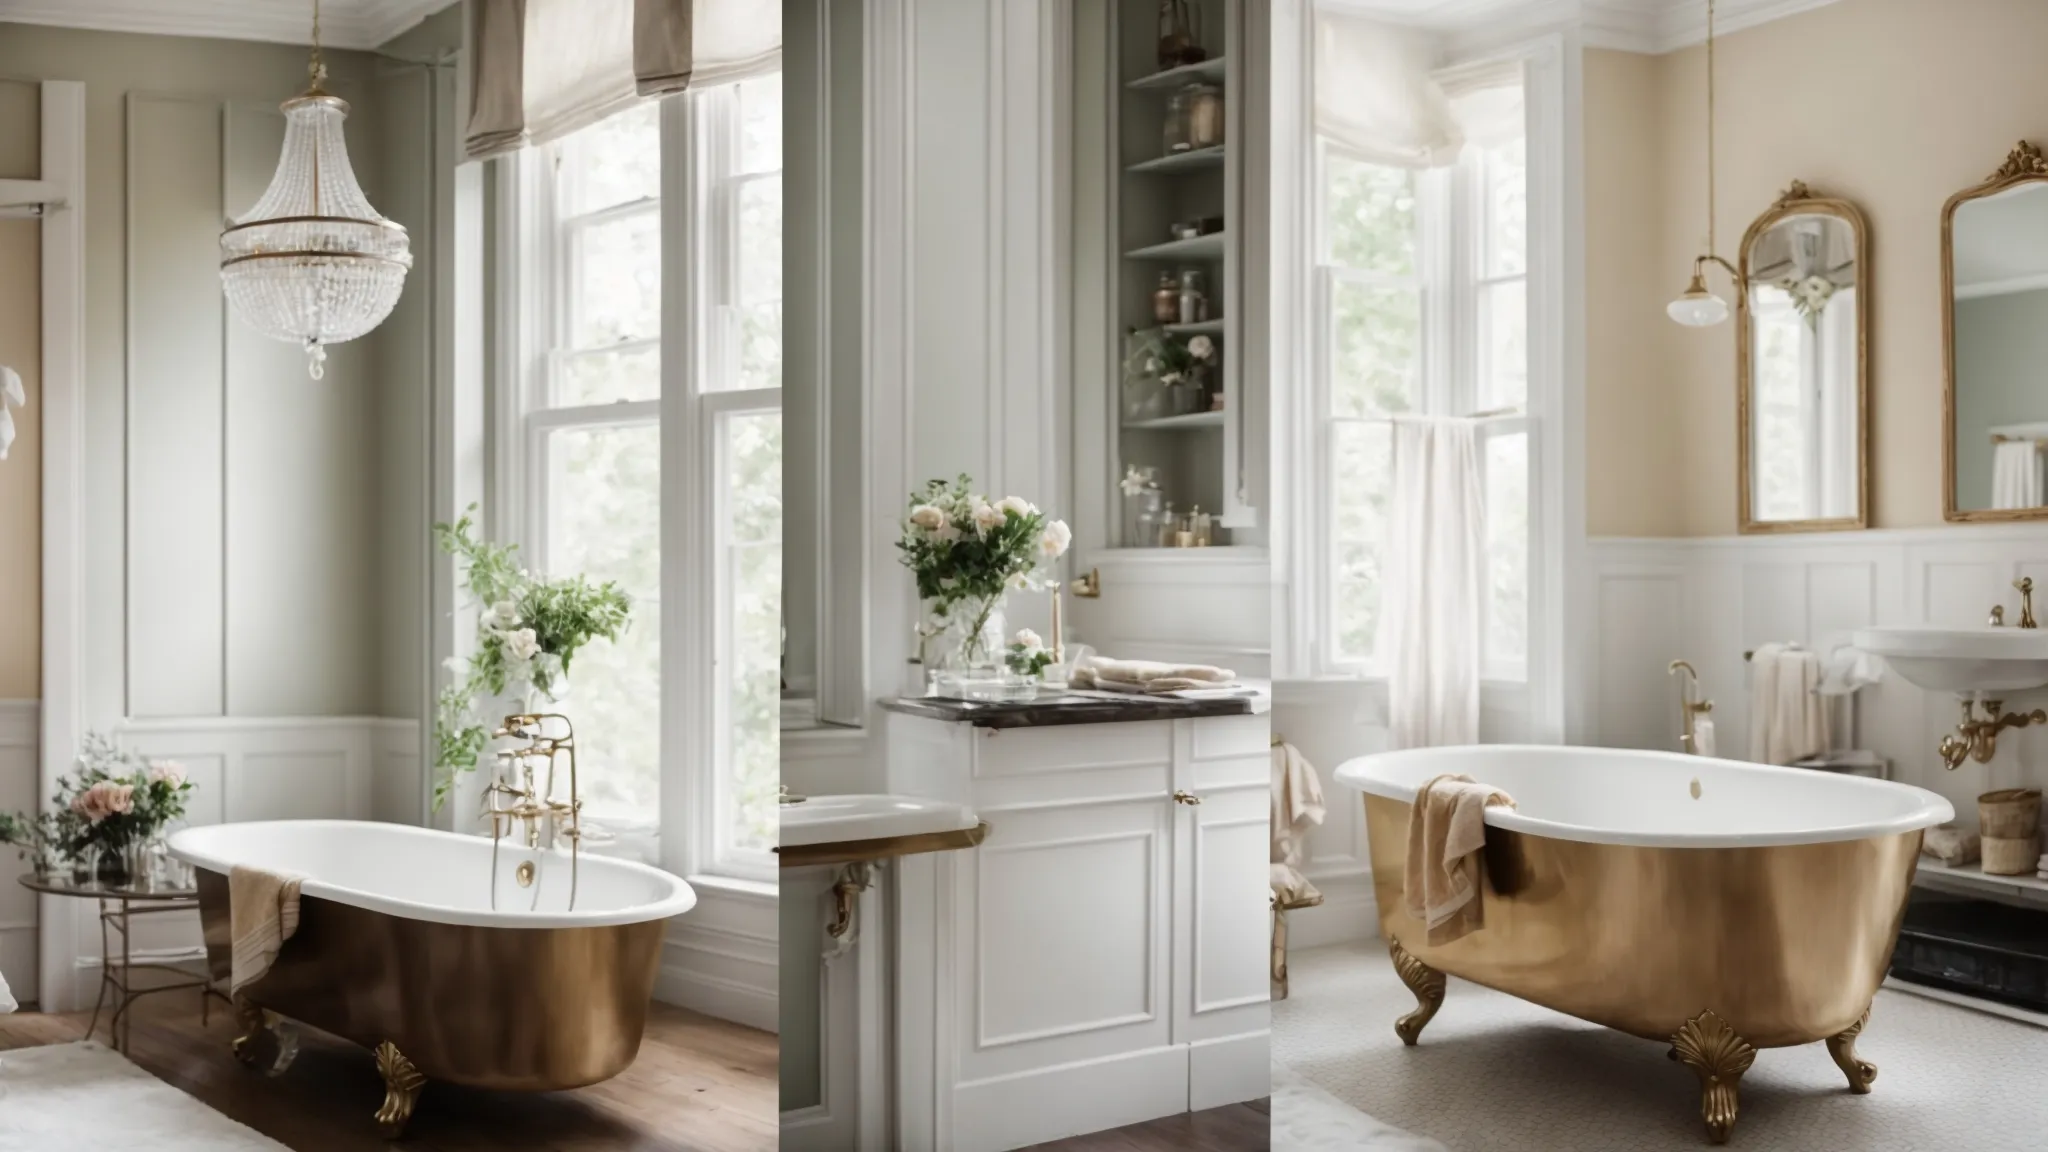 before and after images of a formerly cramped 1920s bathroom now transformed into an airy and elegant space, alongside a victorian-era bathroom restored with period details.